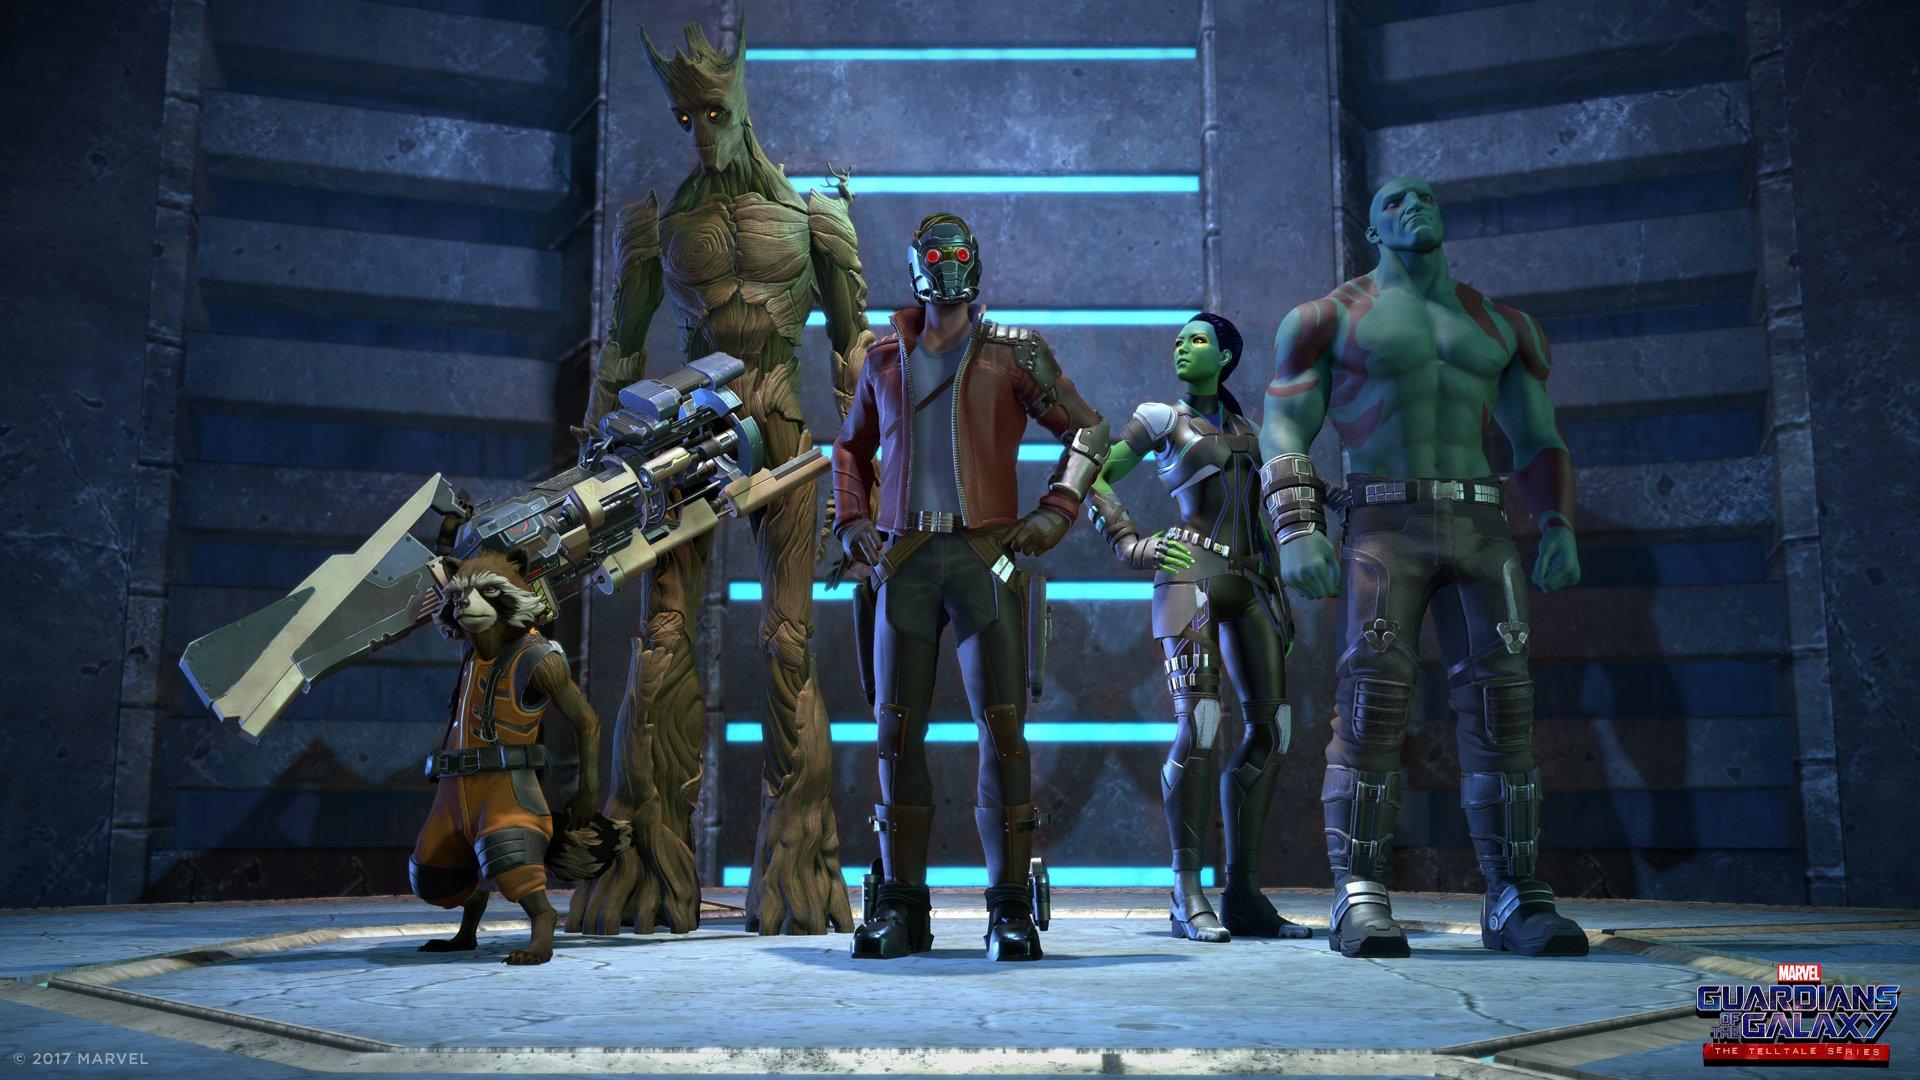 Marvel's Guardians of the Galaxy: The Telltale Series - PlayStation 4